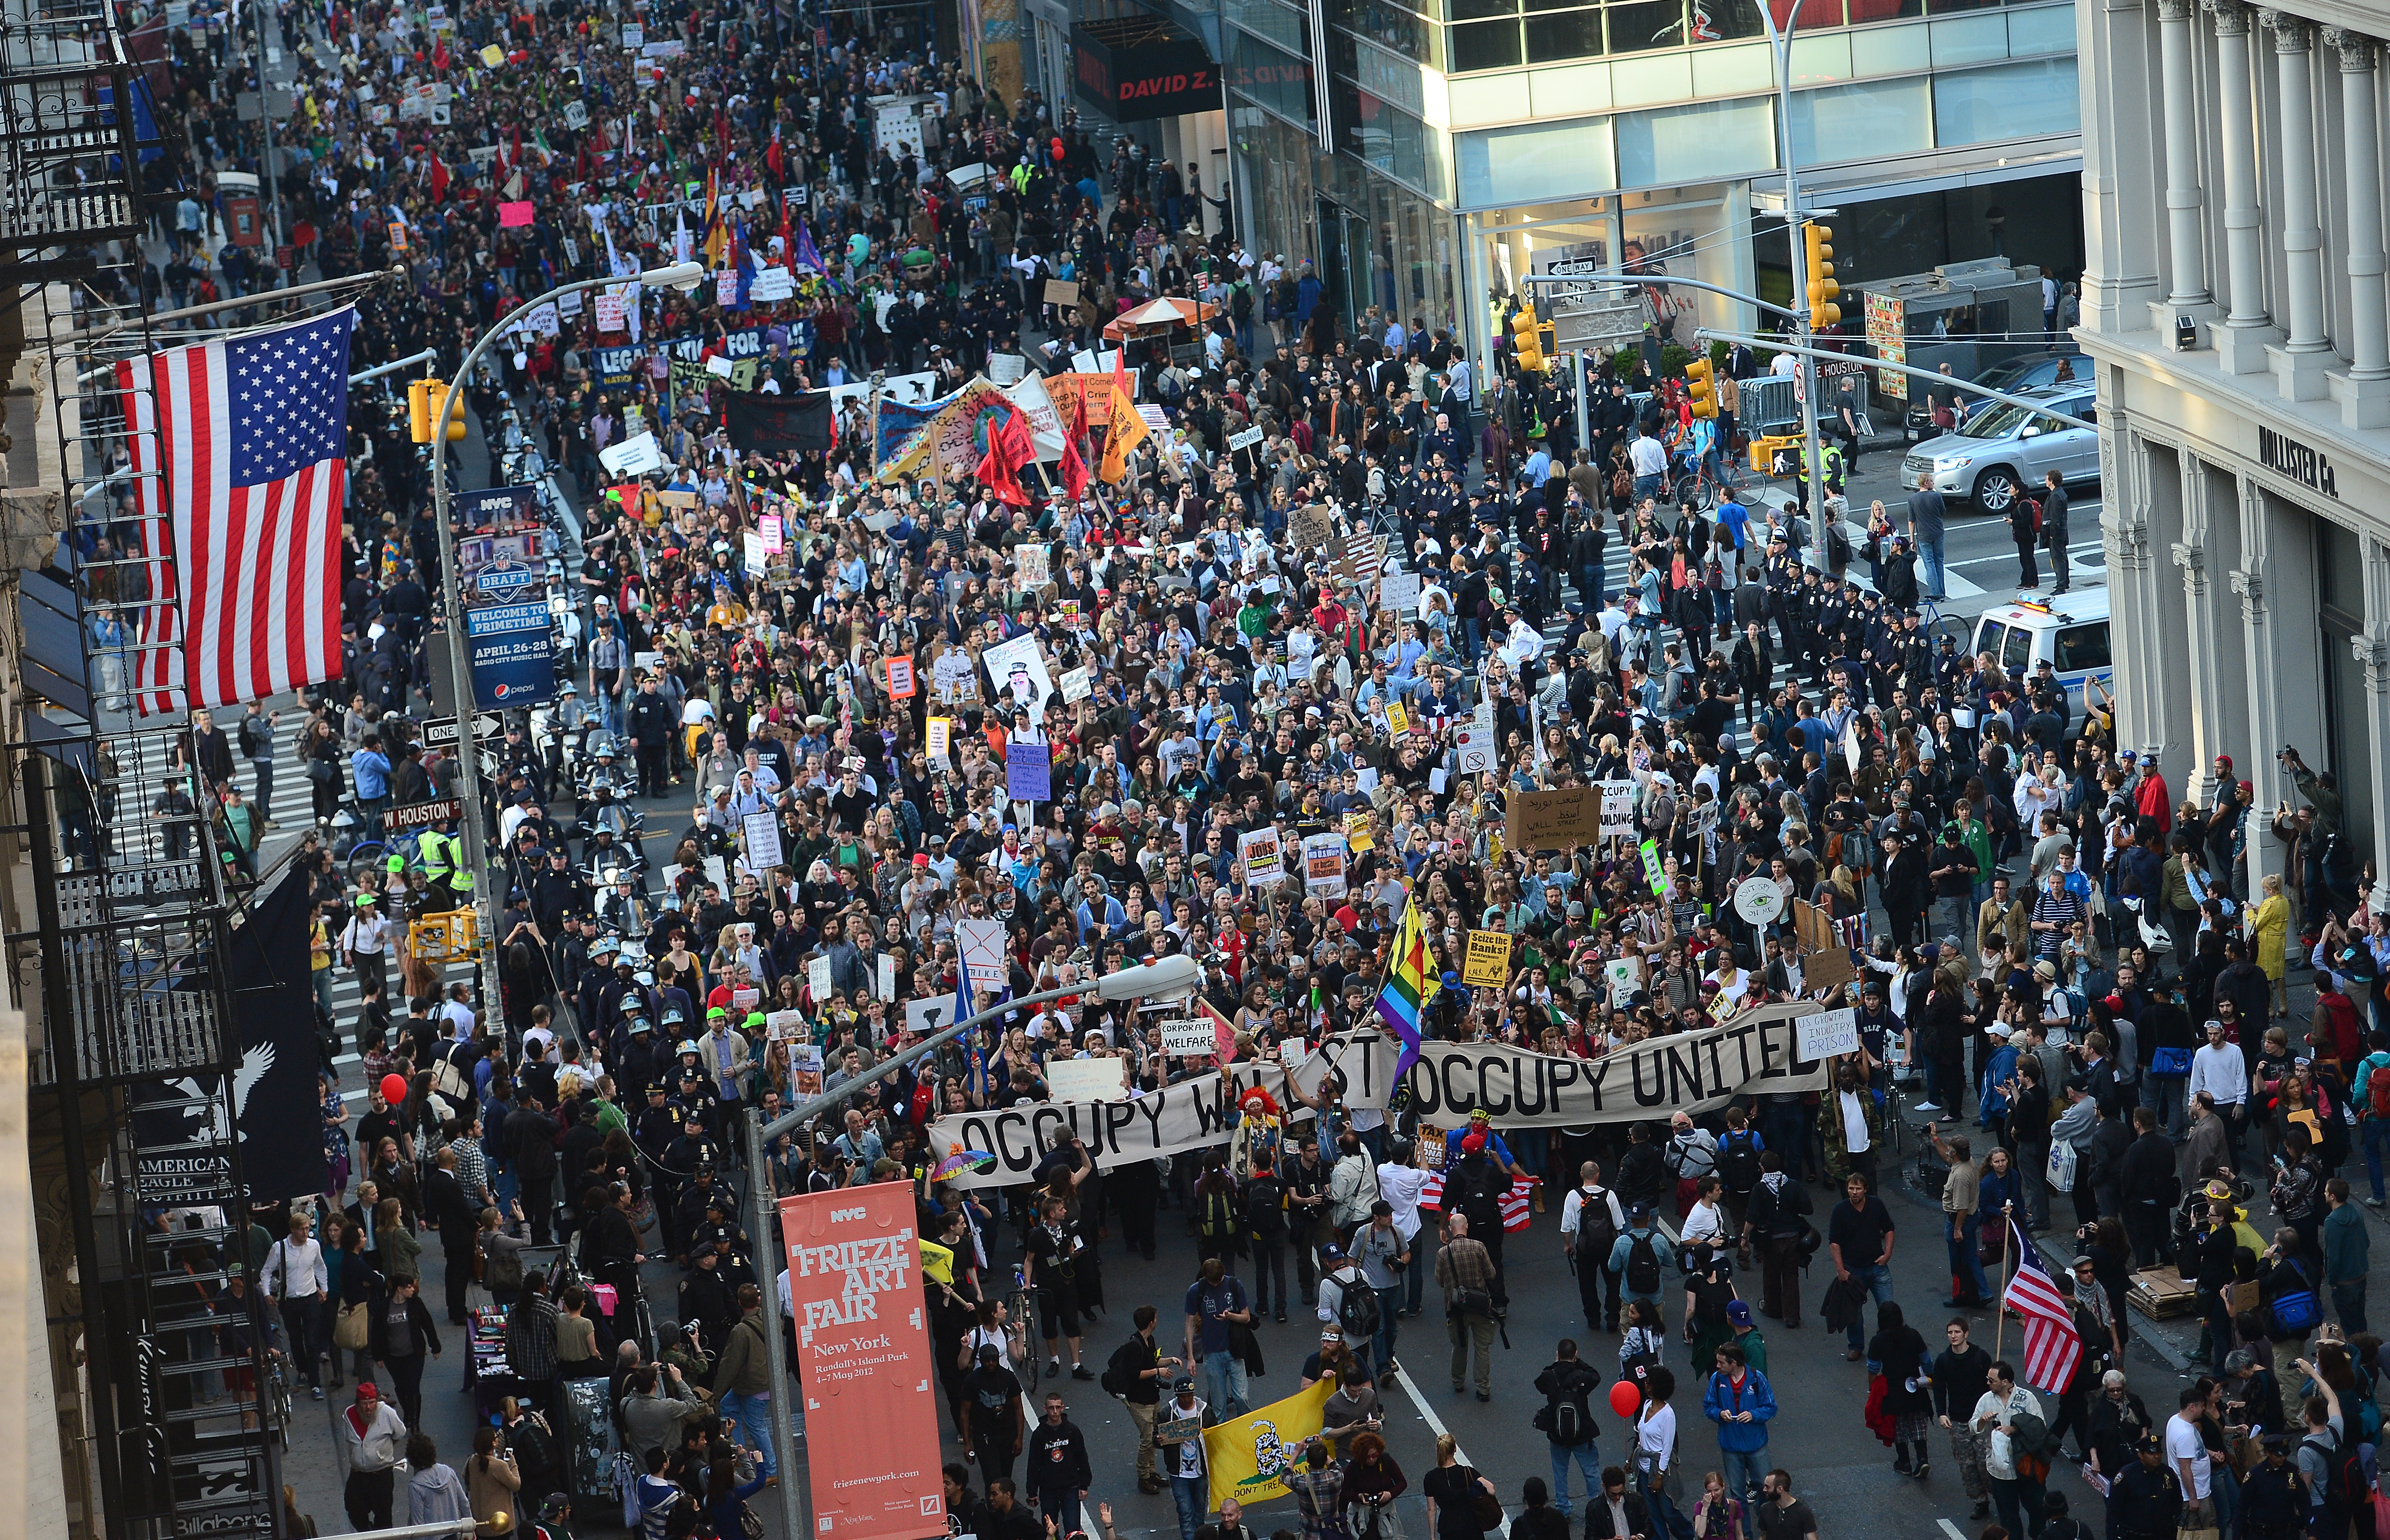 Occupy Wall Street participants stage a march down Broadway